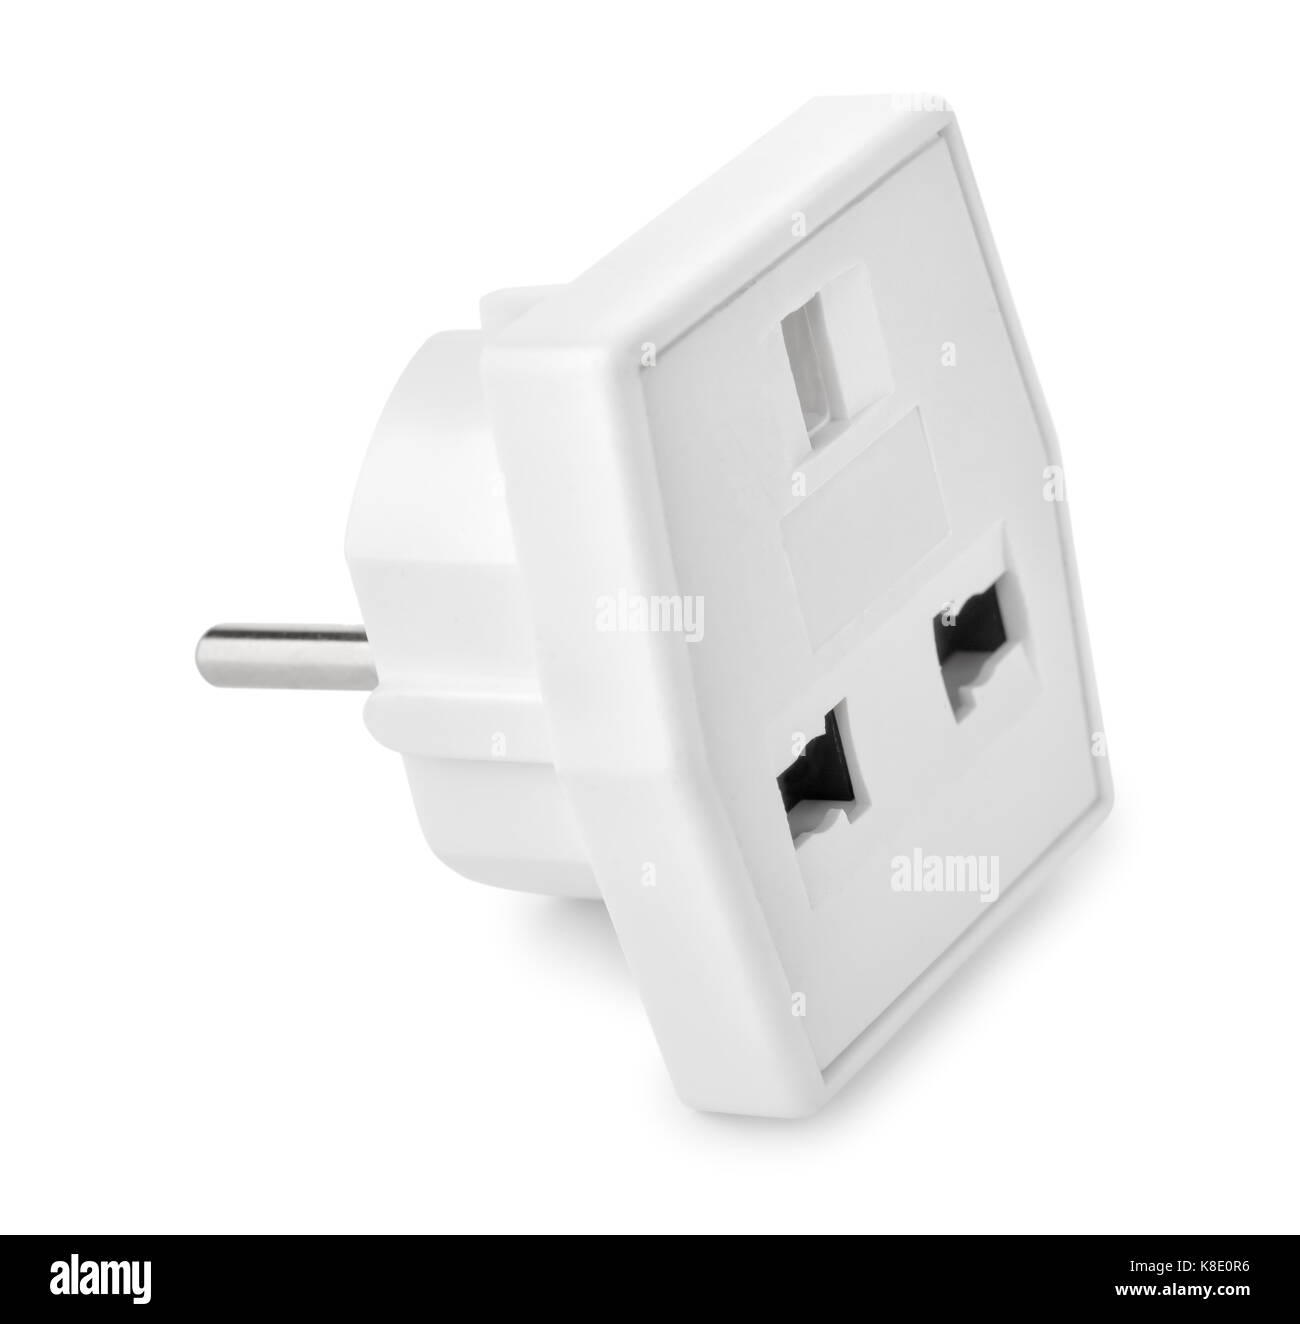 White plastic power adapter isolated on white Stock Photo